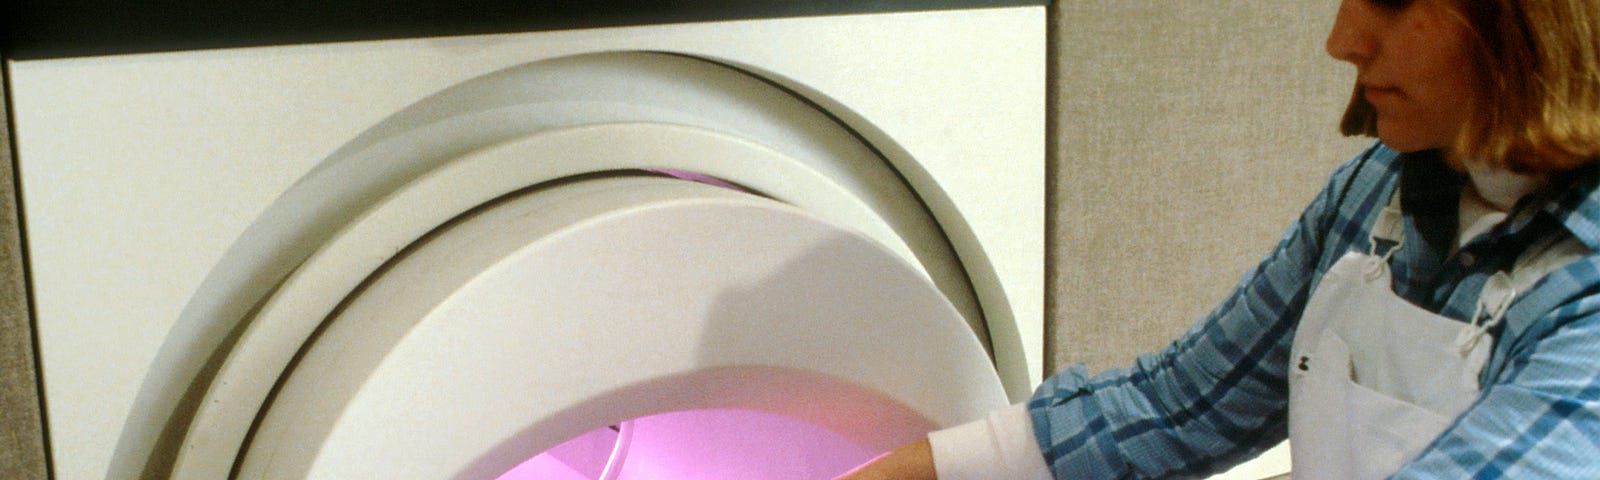 A woman is situated on an old MRI machine by a nurse.